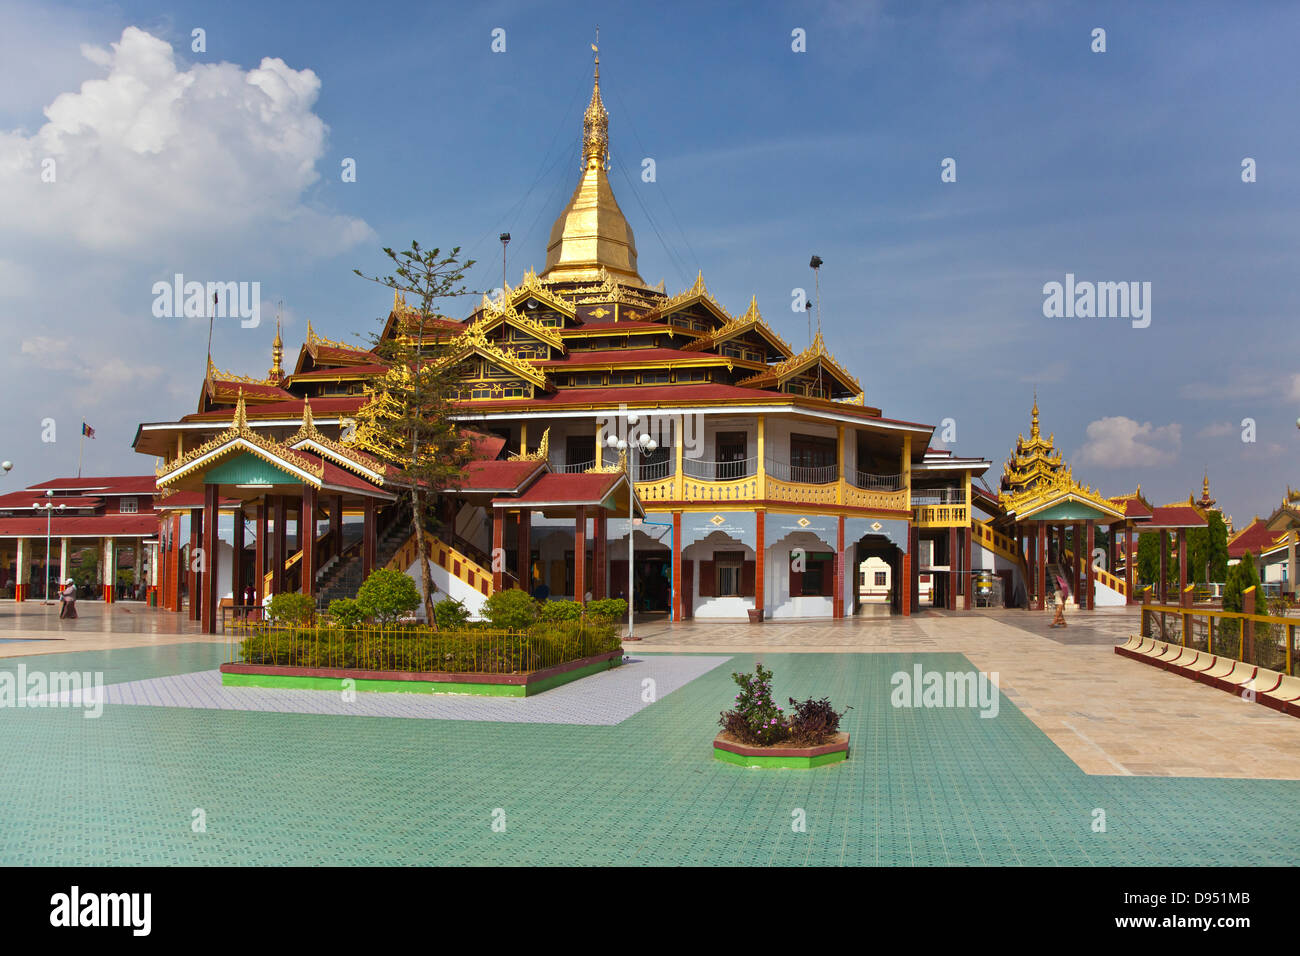 The TEMPLE of PHAUNG DAW OO PAYA is the holiest Buddhist site in SHAN STATE - INLE LAKE, MYANMAR Stock Photo